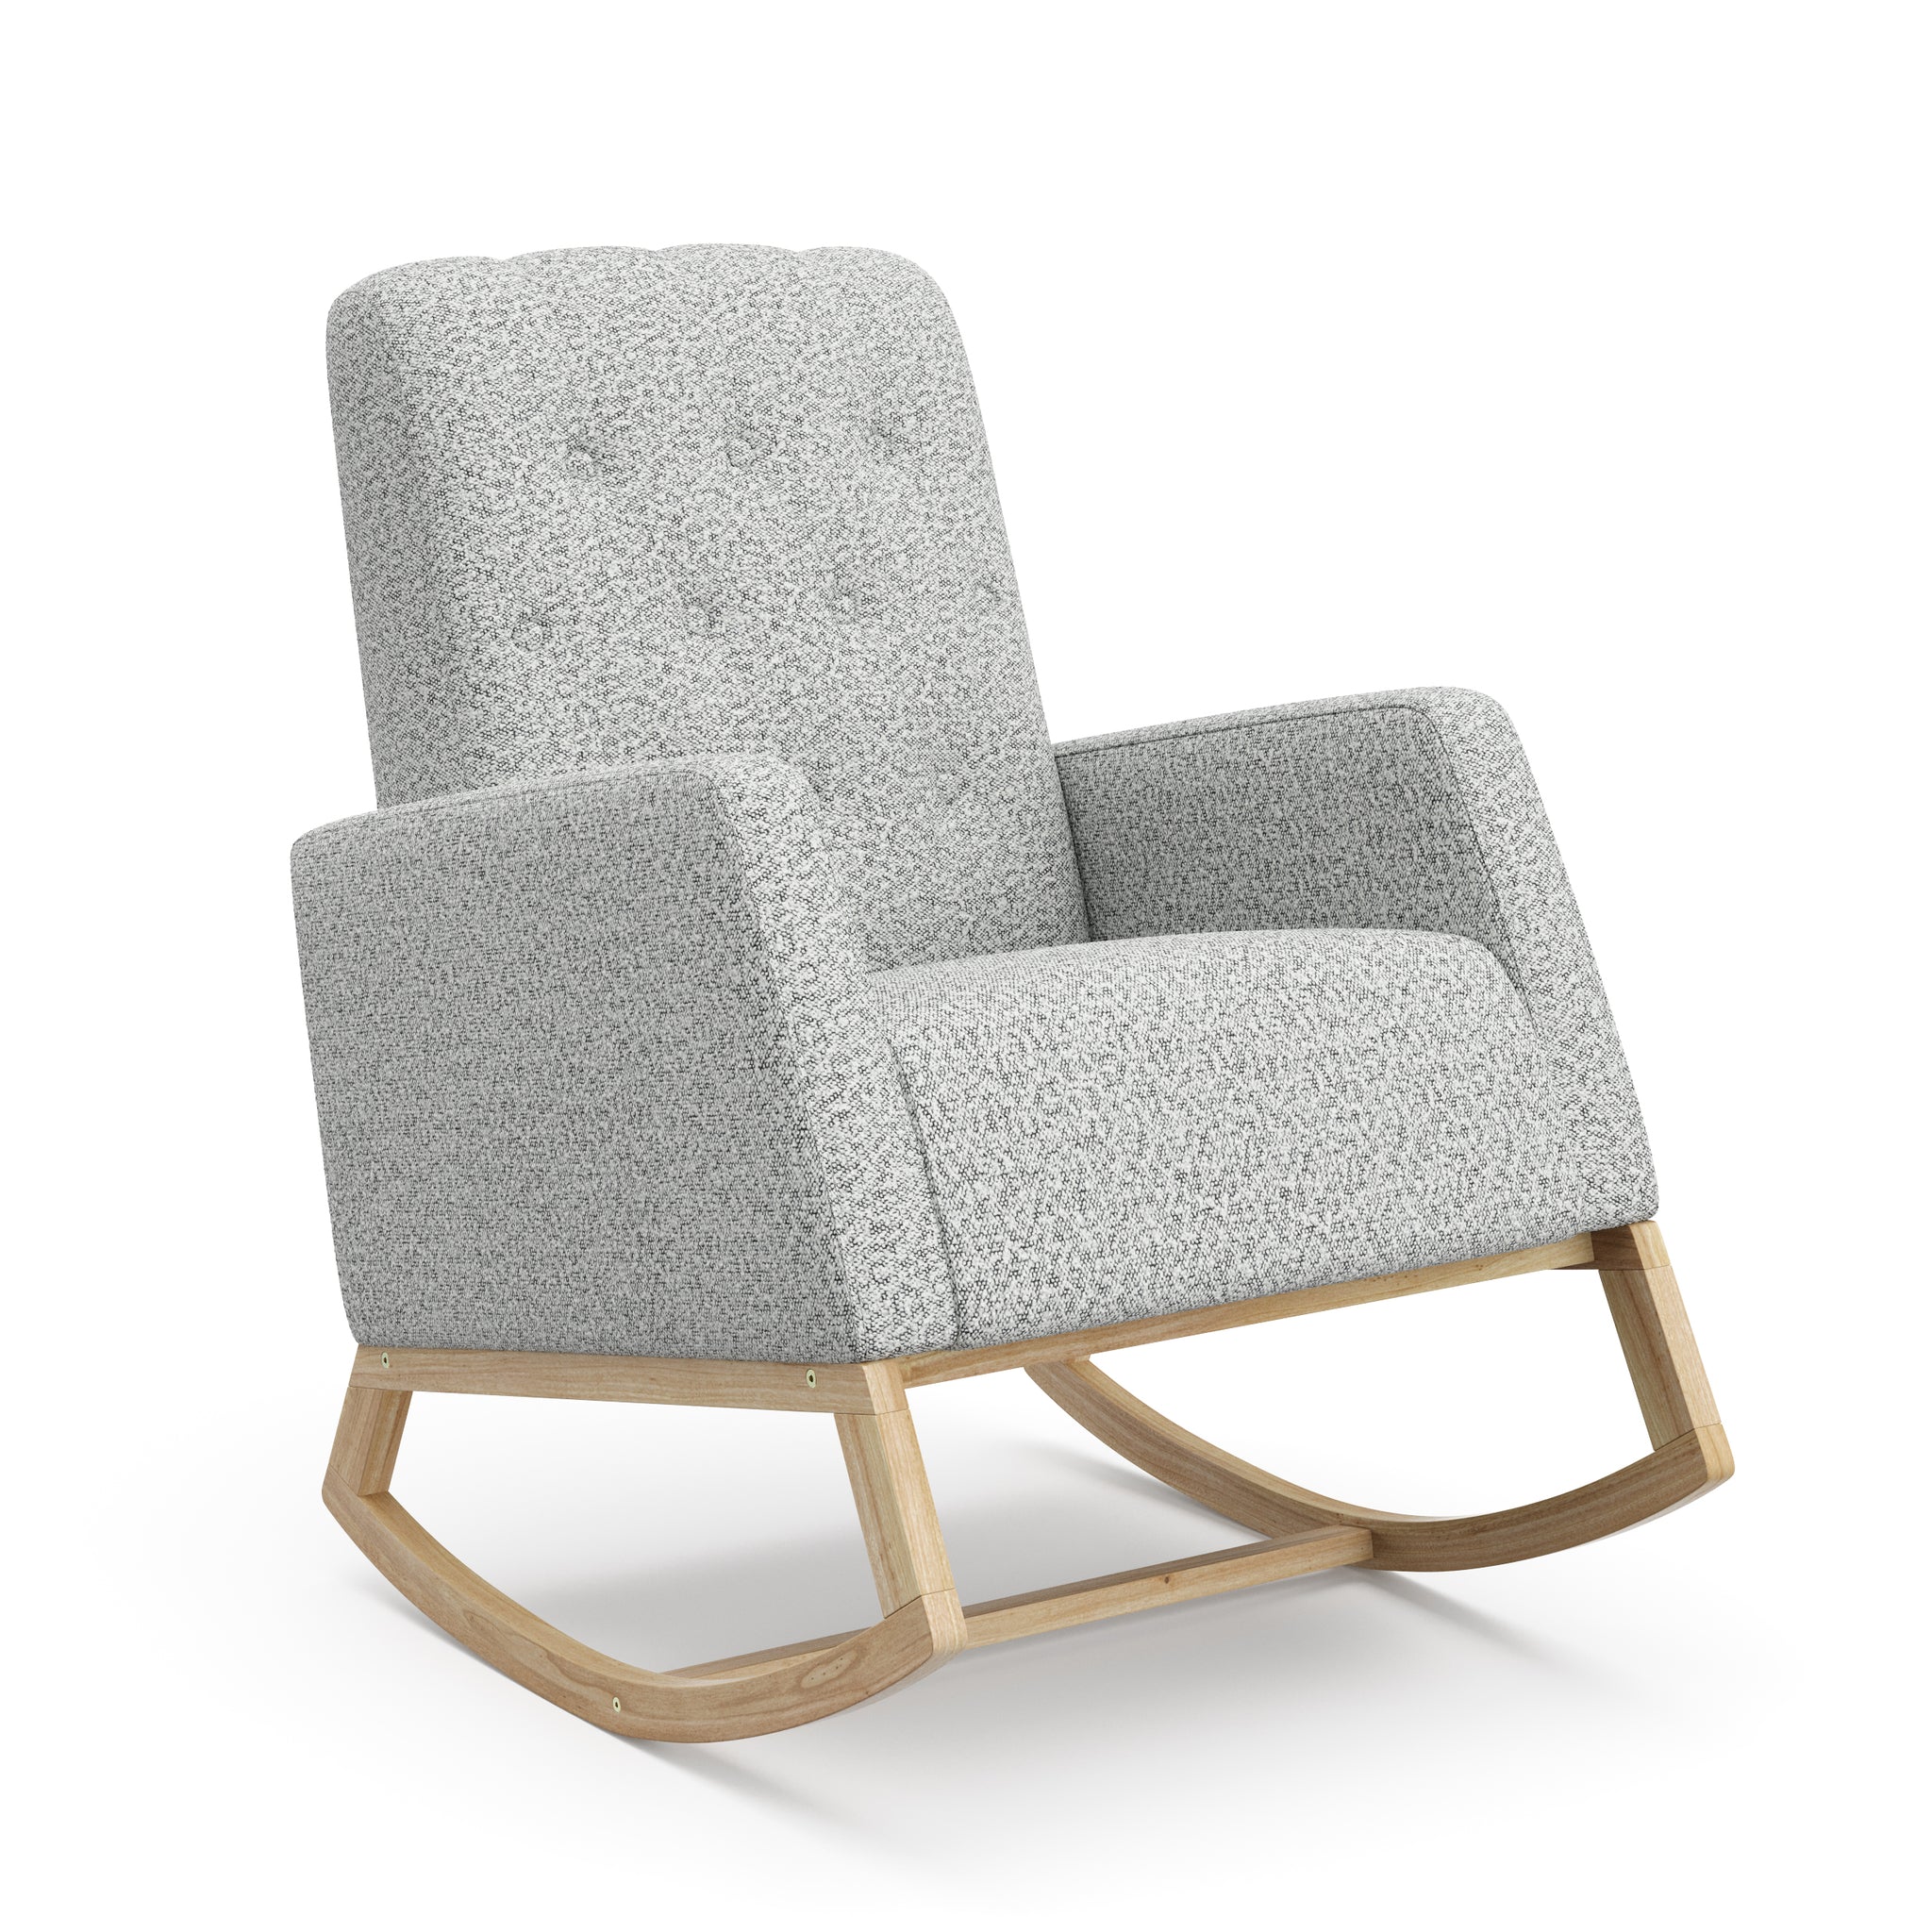 Angled view of natural wood base rocker chair with salt & pepper boucle fabric